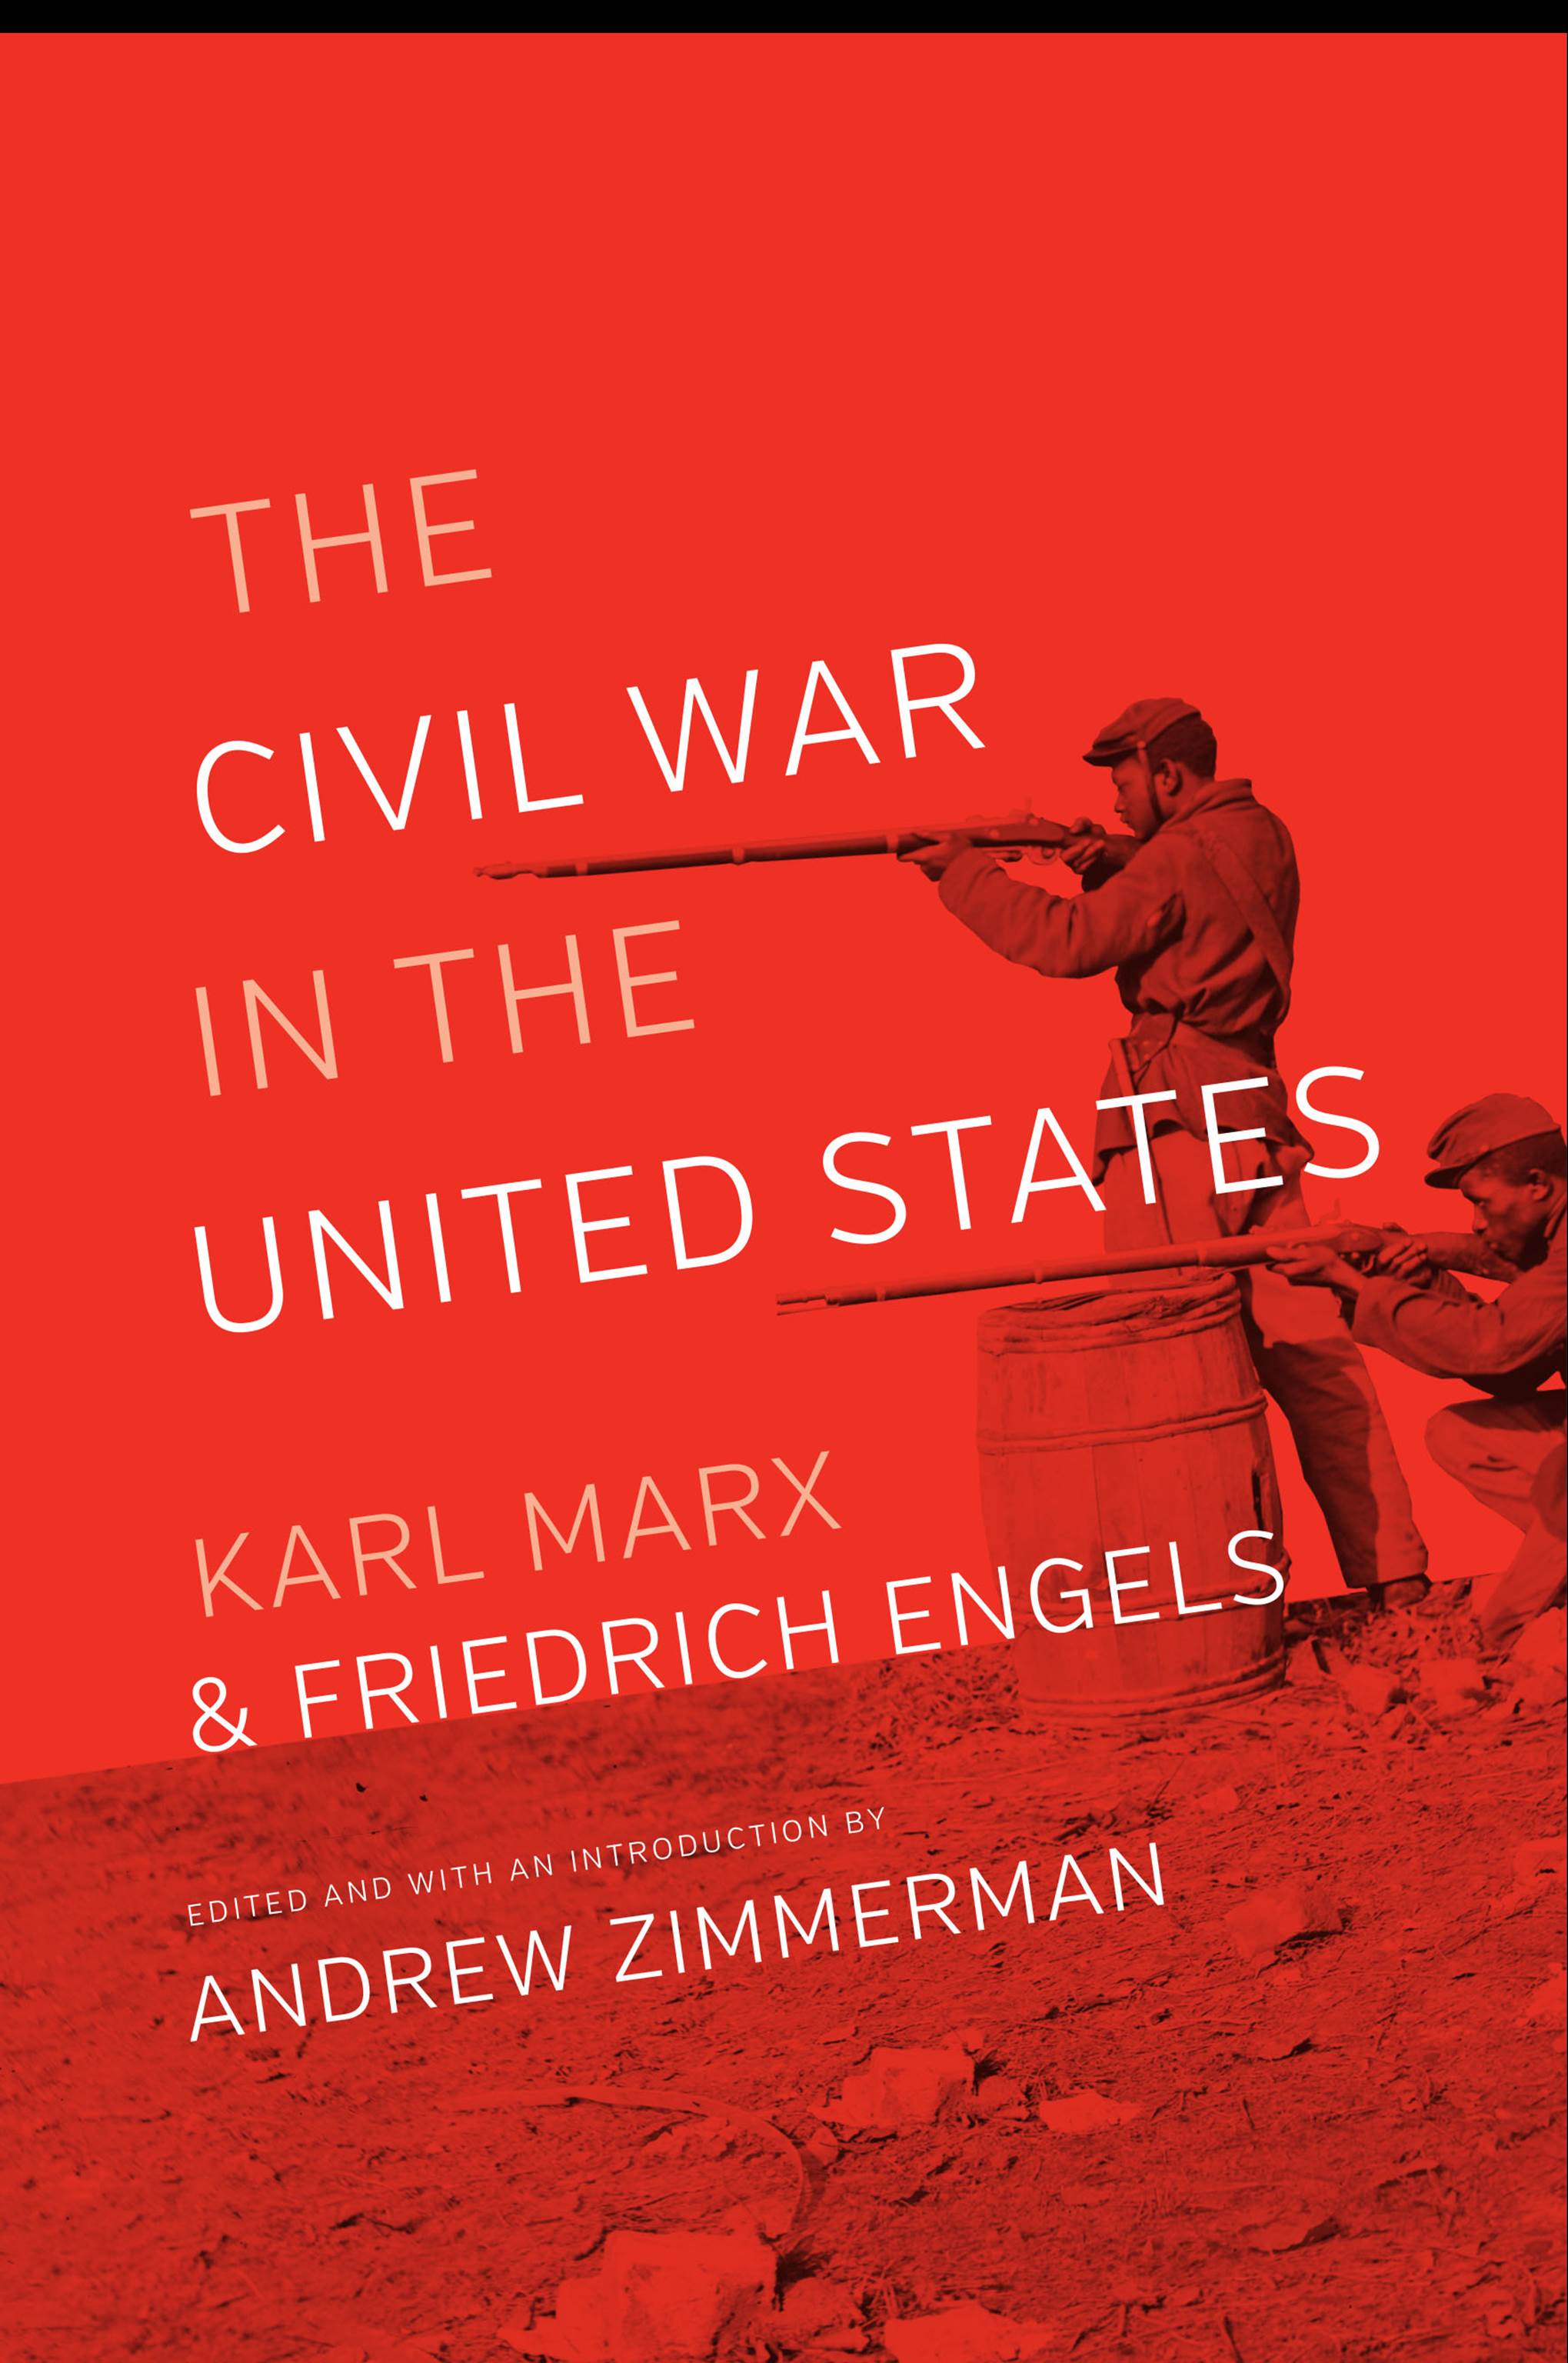 Book Event: The Civil war in the United States; Karl Marx and Friedrich Engels